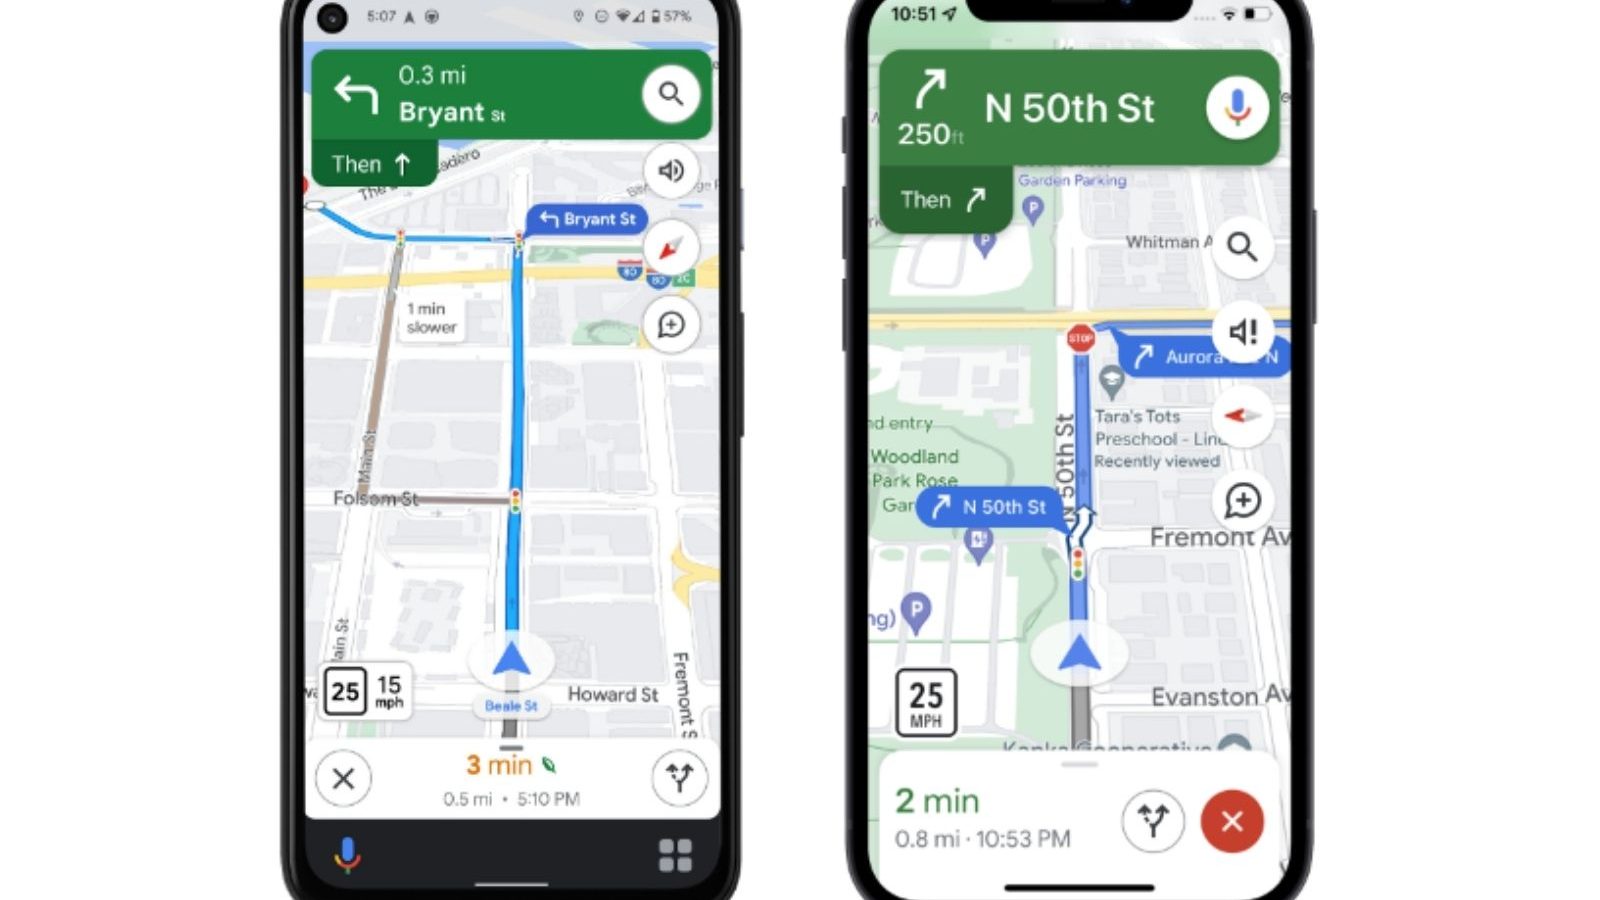 Google Maps will soon display traffic lights, stop signs, and tolls